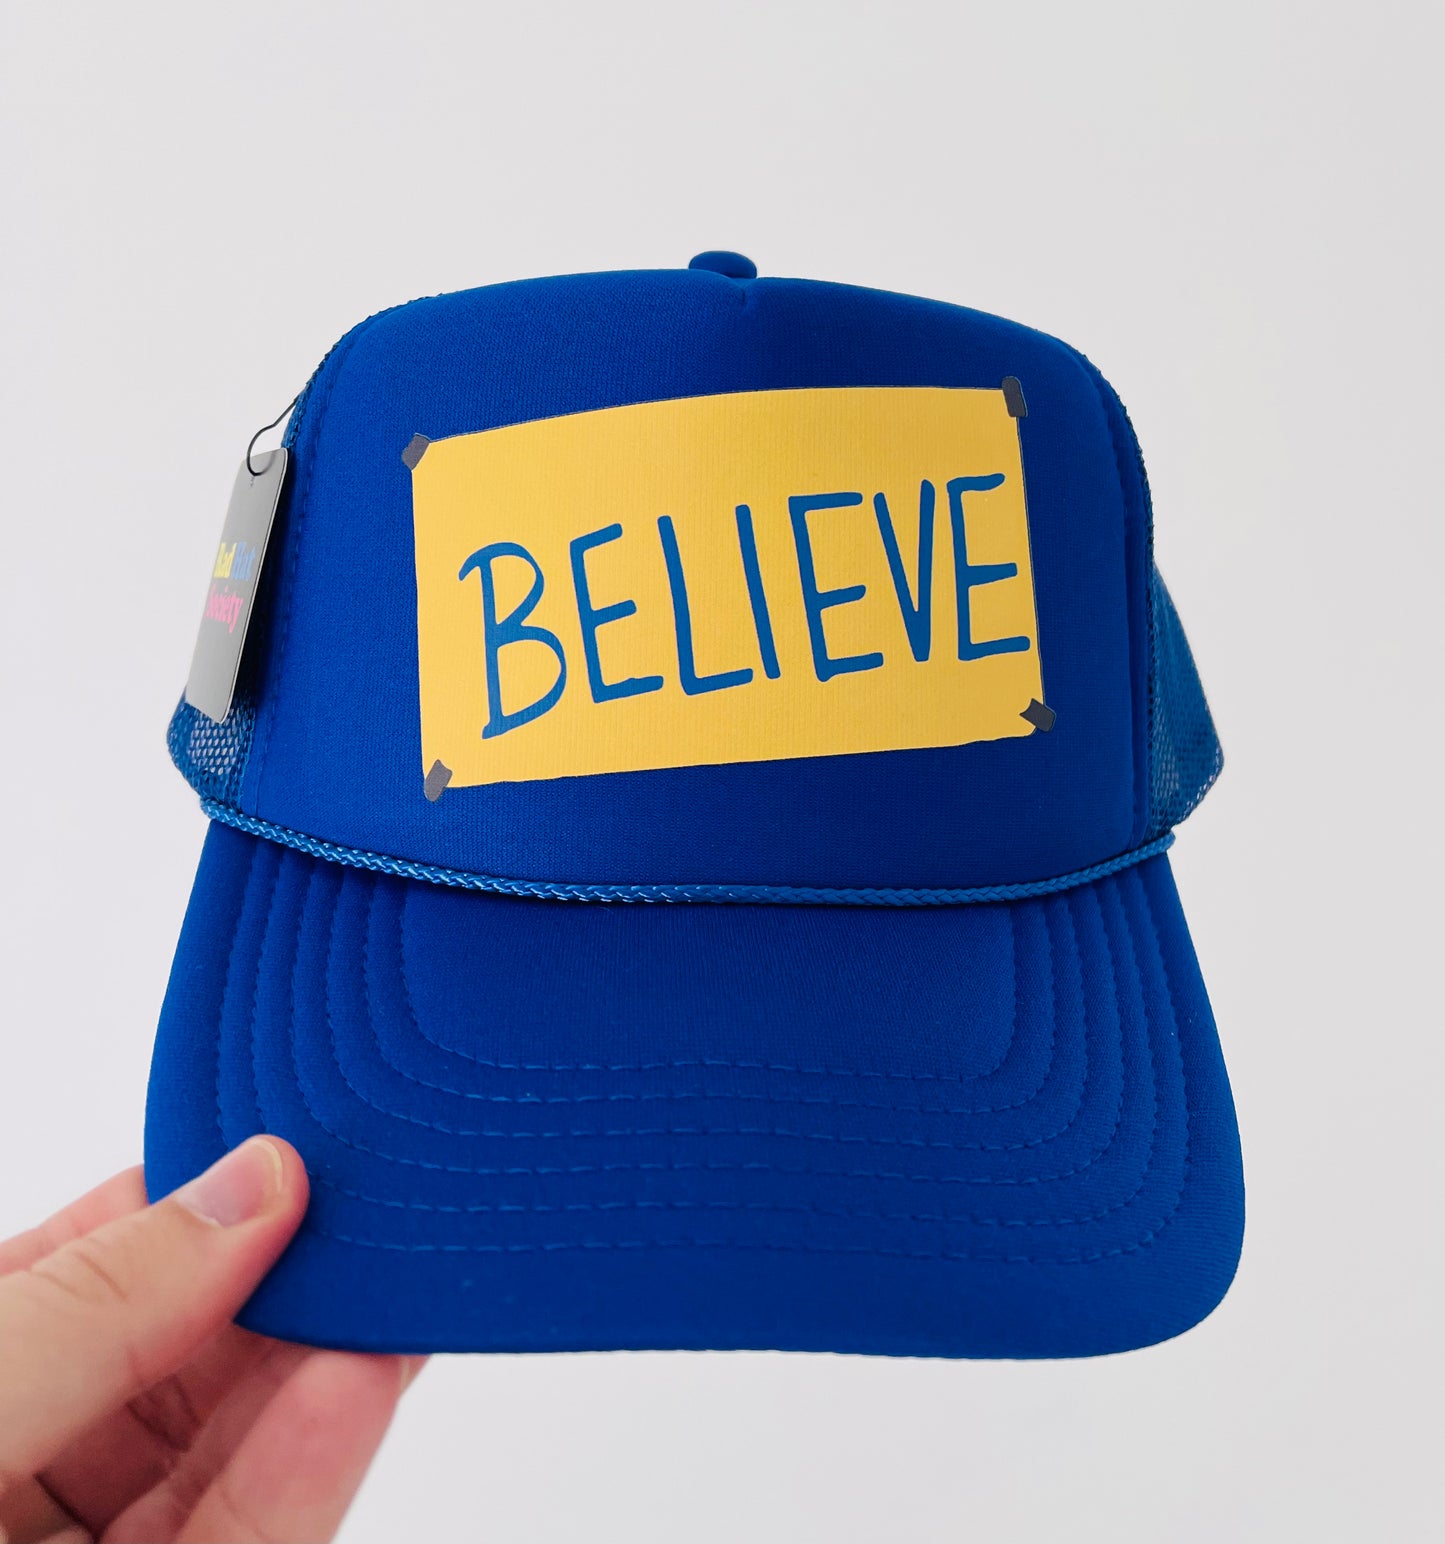 Believe sign (Ted Lasso)